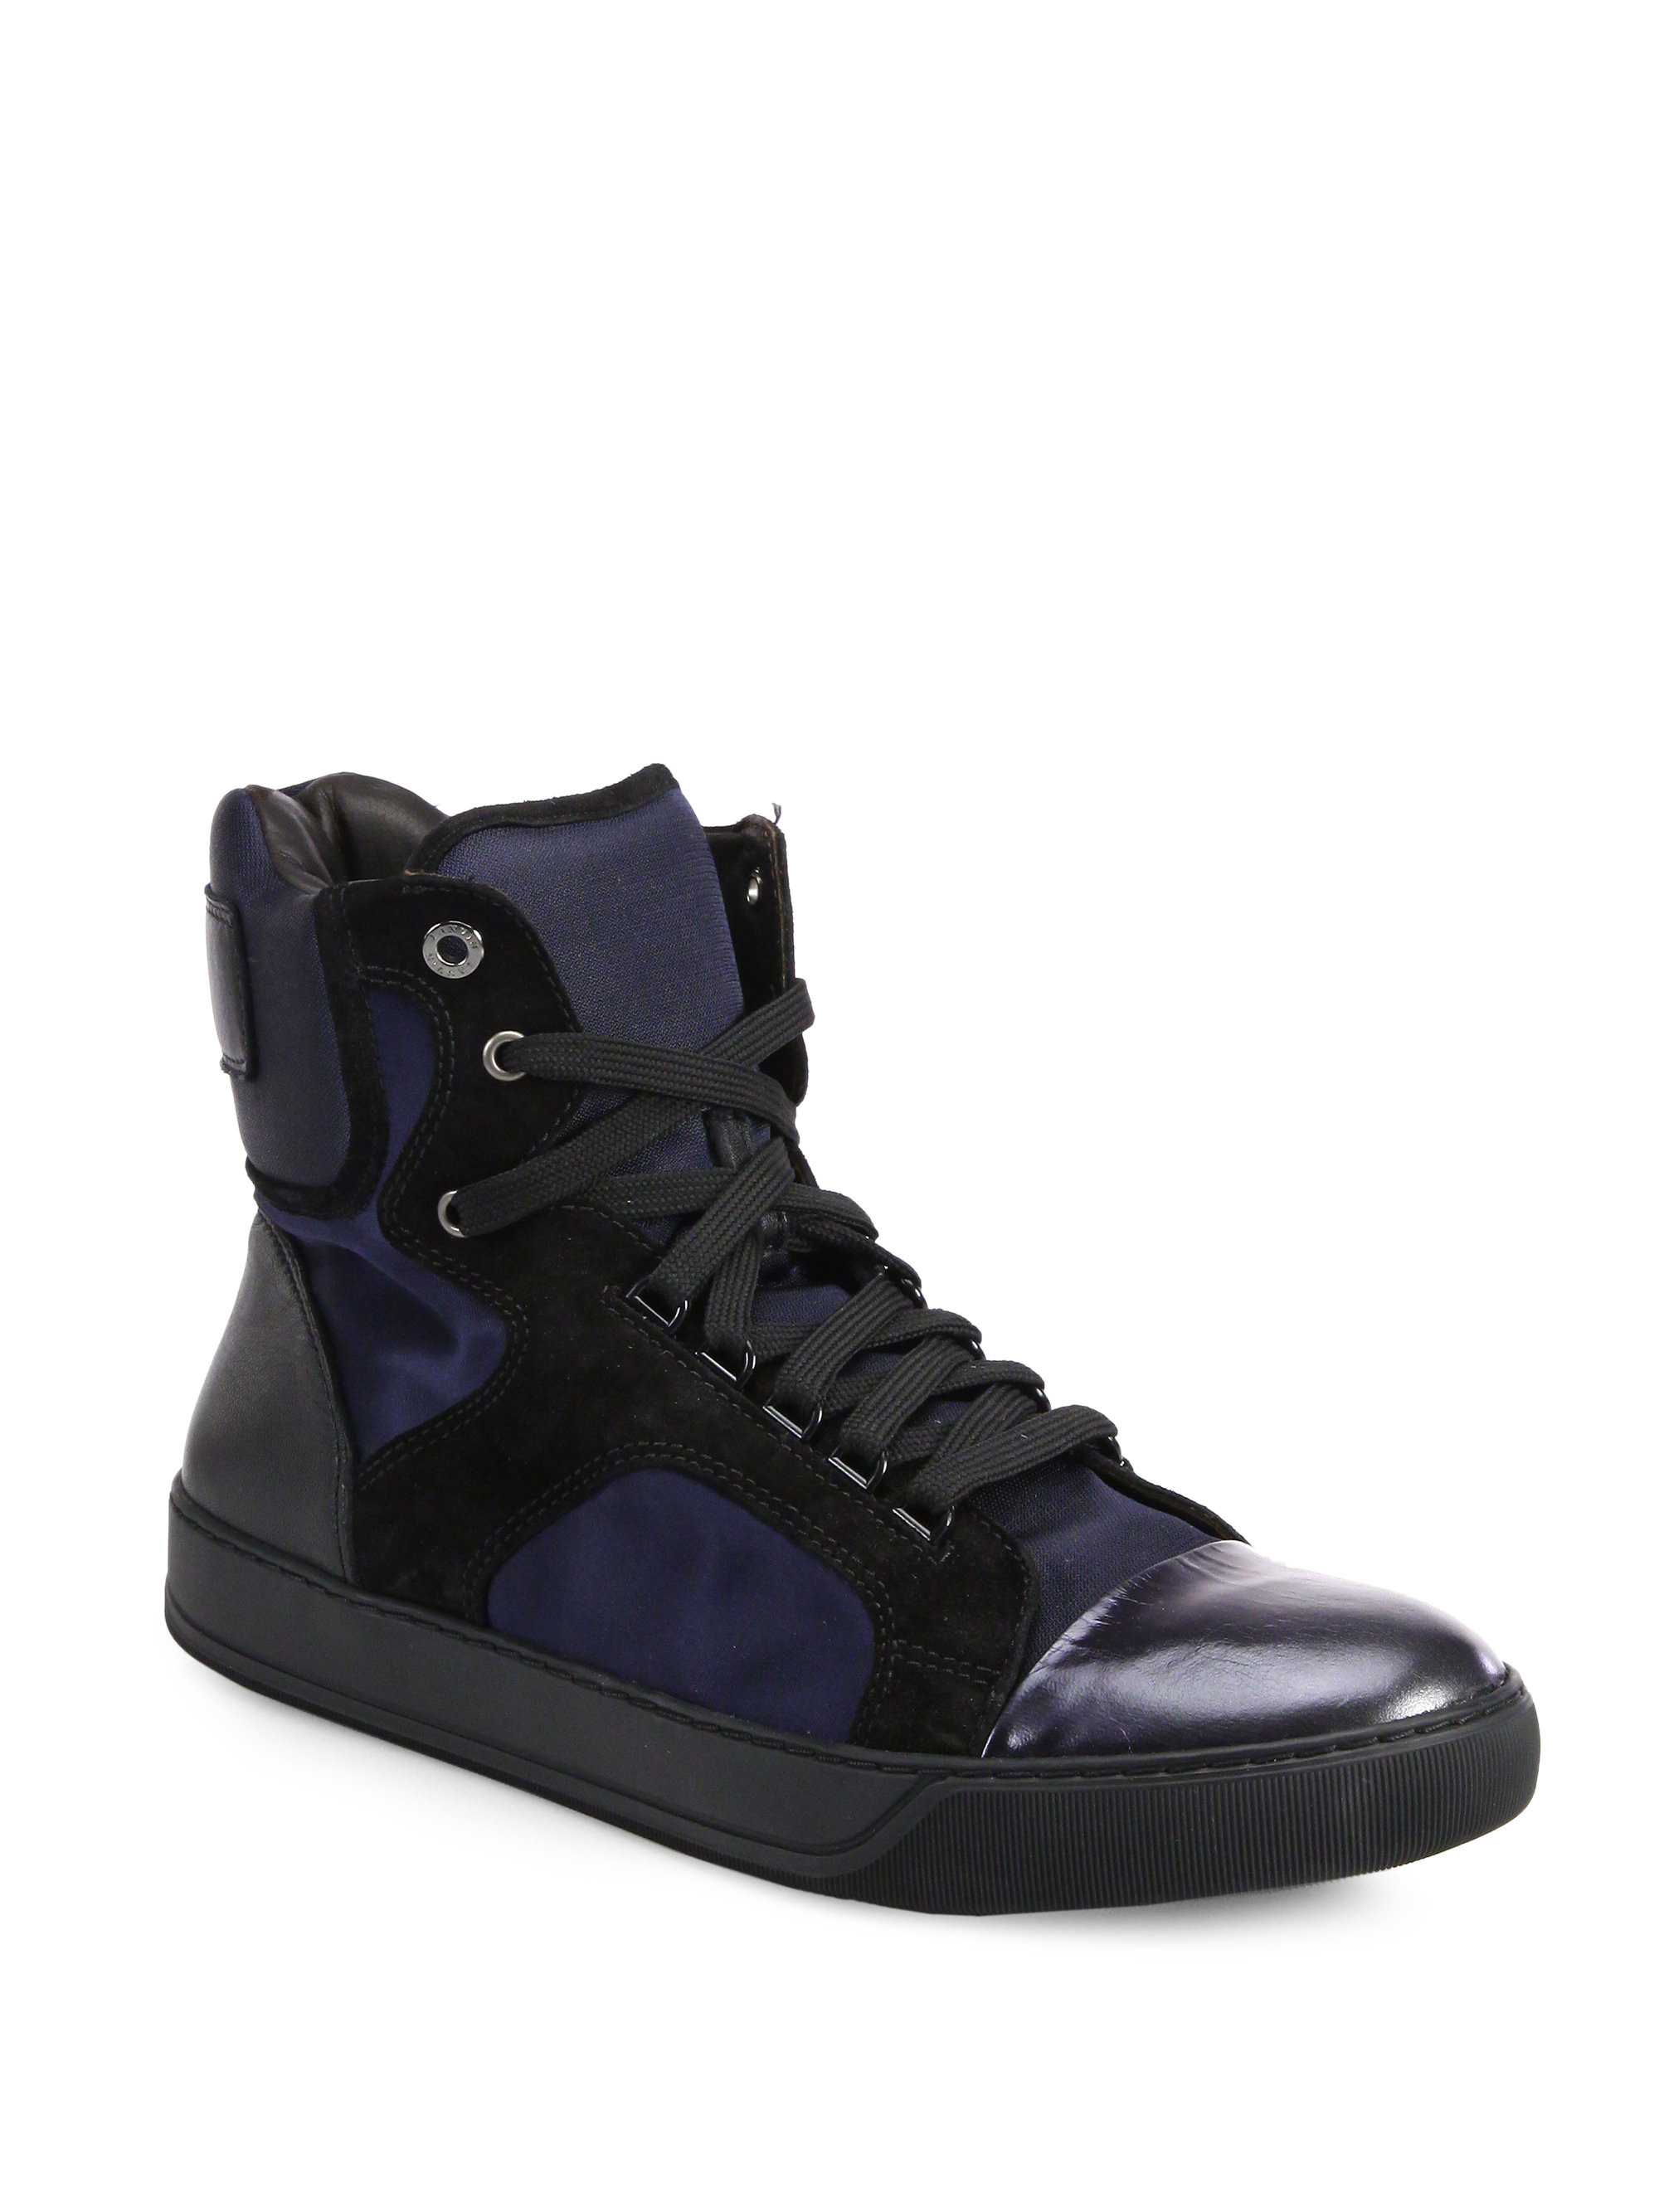 Lyst - Lanvin Satin & Metallic Leather High-top Sneakers in Blue for Men